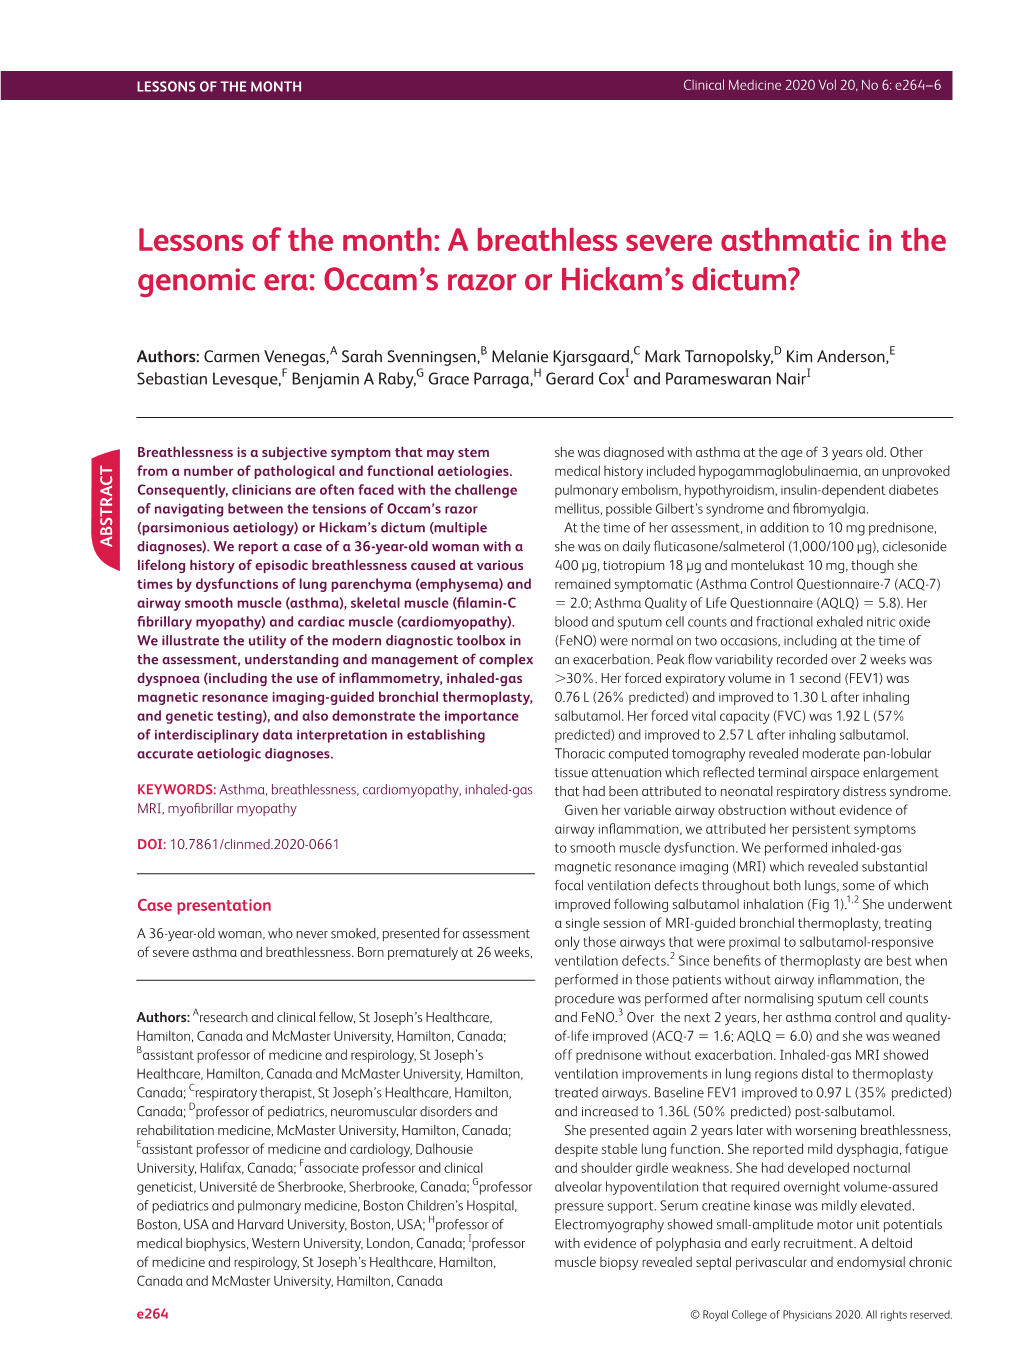 Lessons of the Month: a Breathless Severe Asthmatic in the Genomic Era: Occam’S Razor Or Hickam’S Dictum?